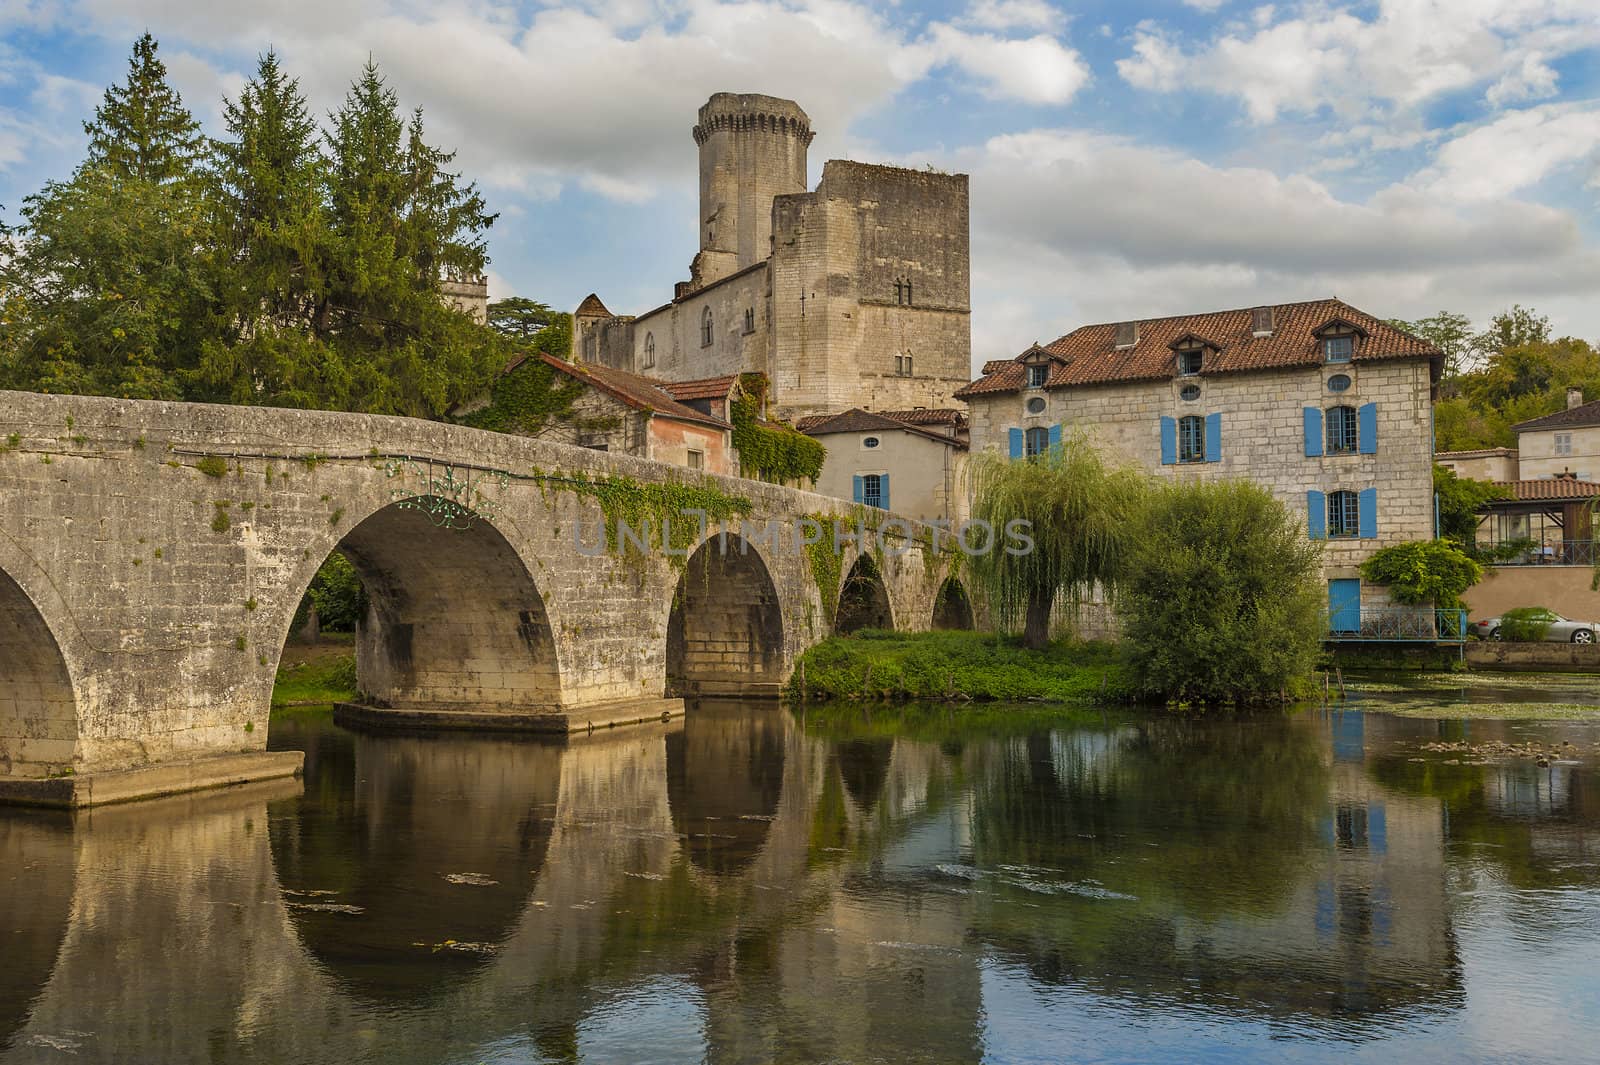 Bridge and medieval castle by f/2sumicron